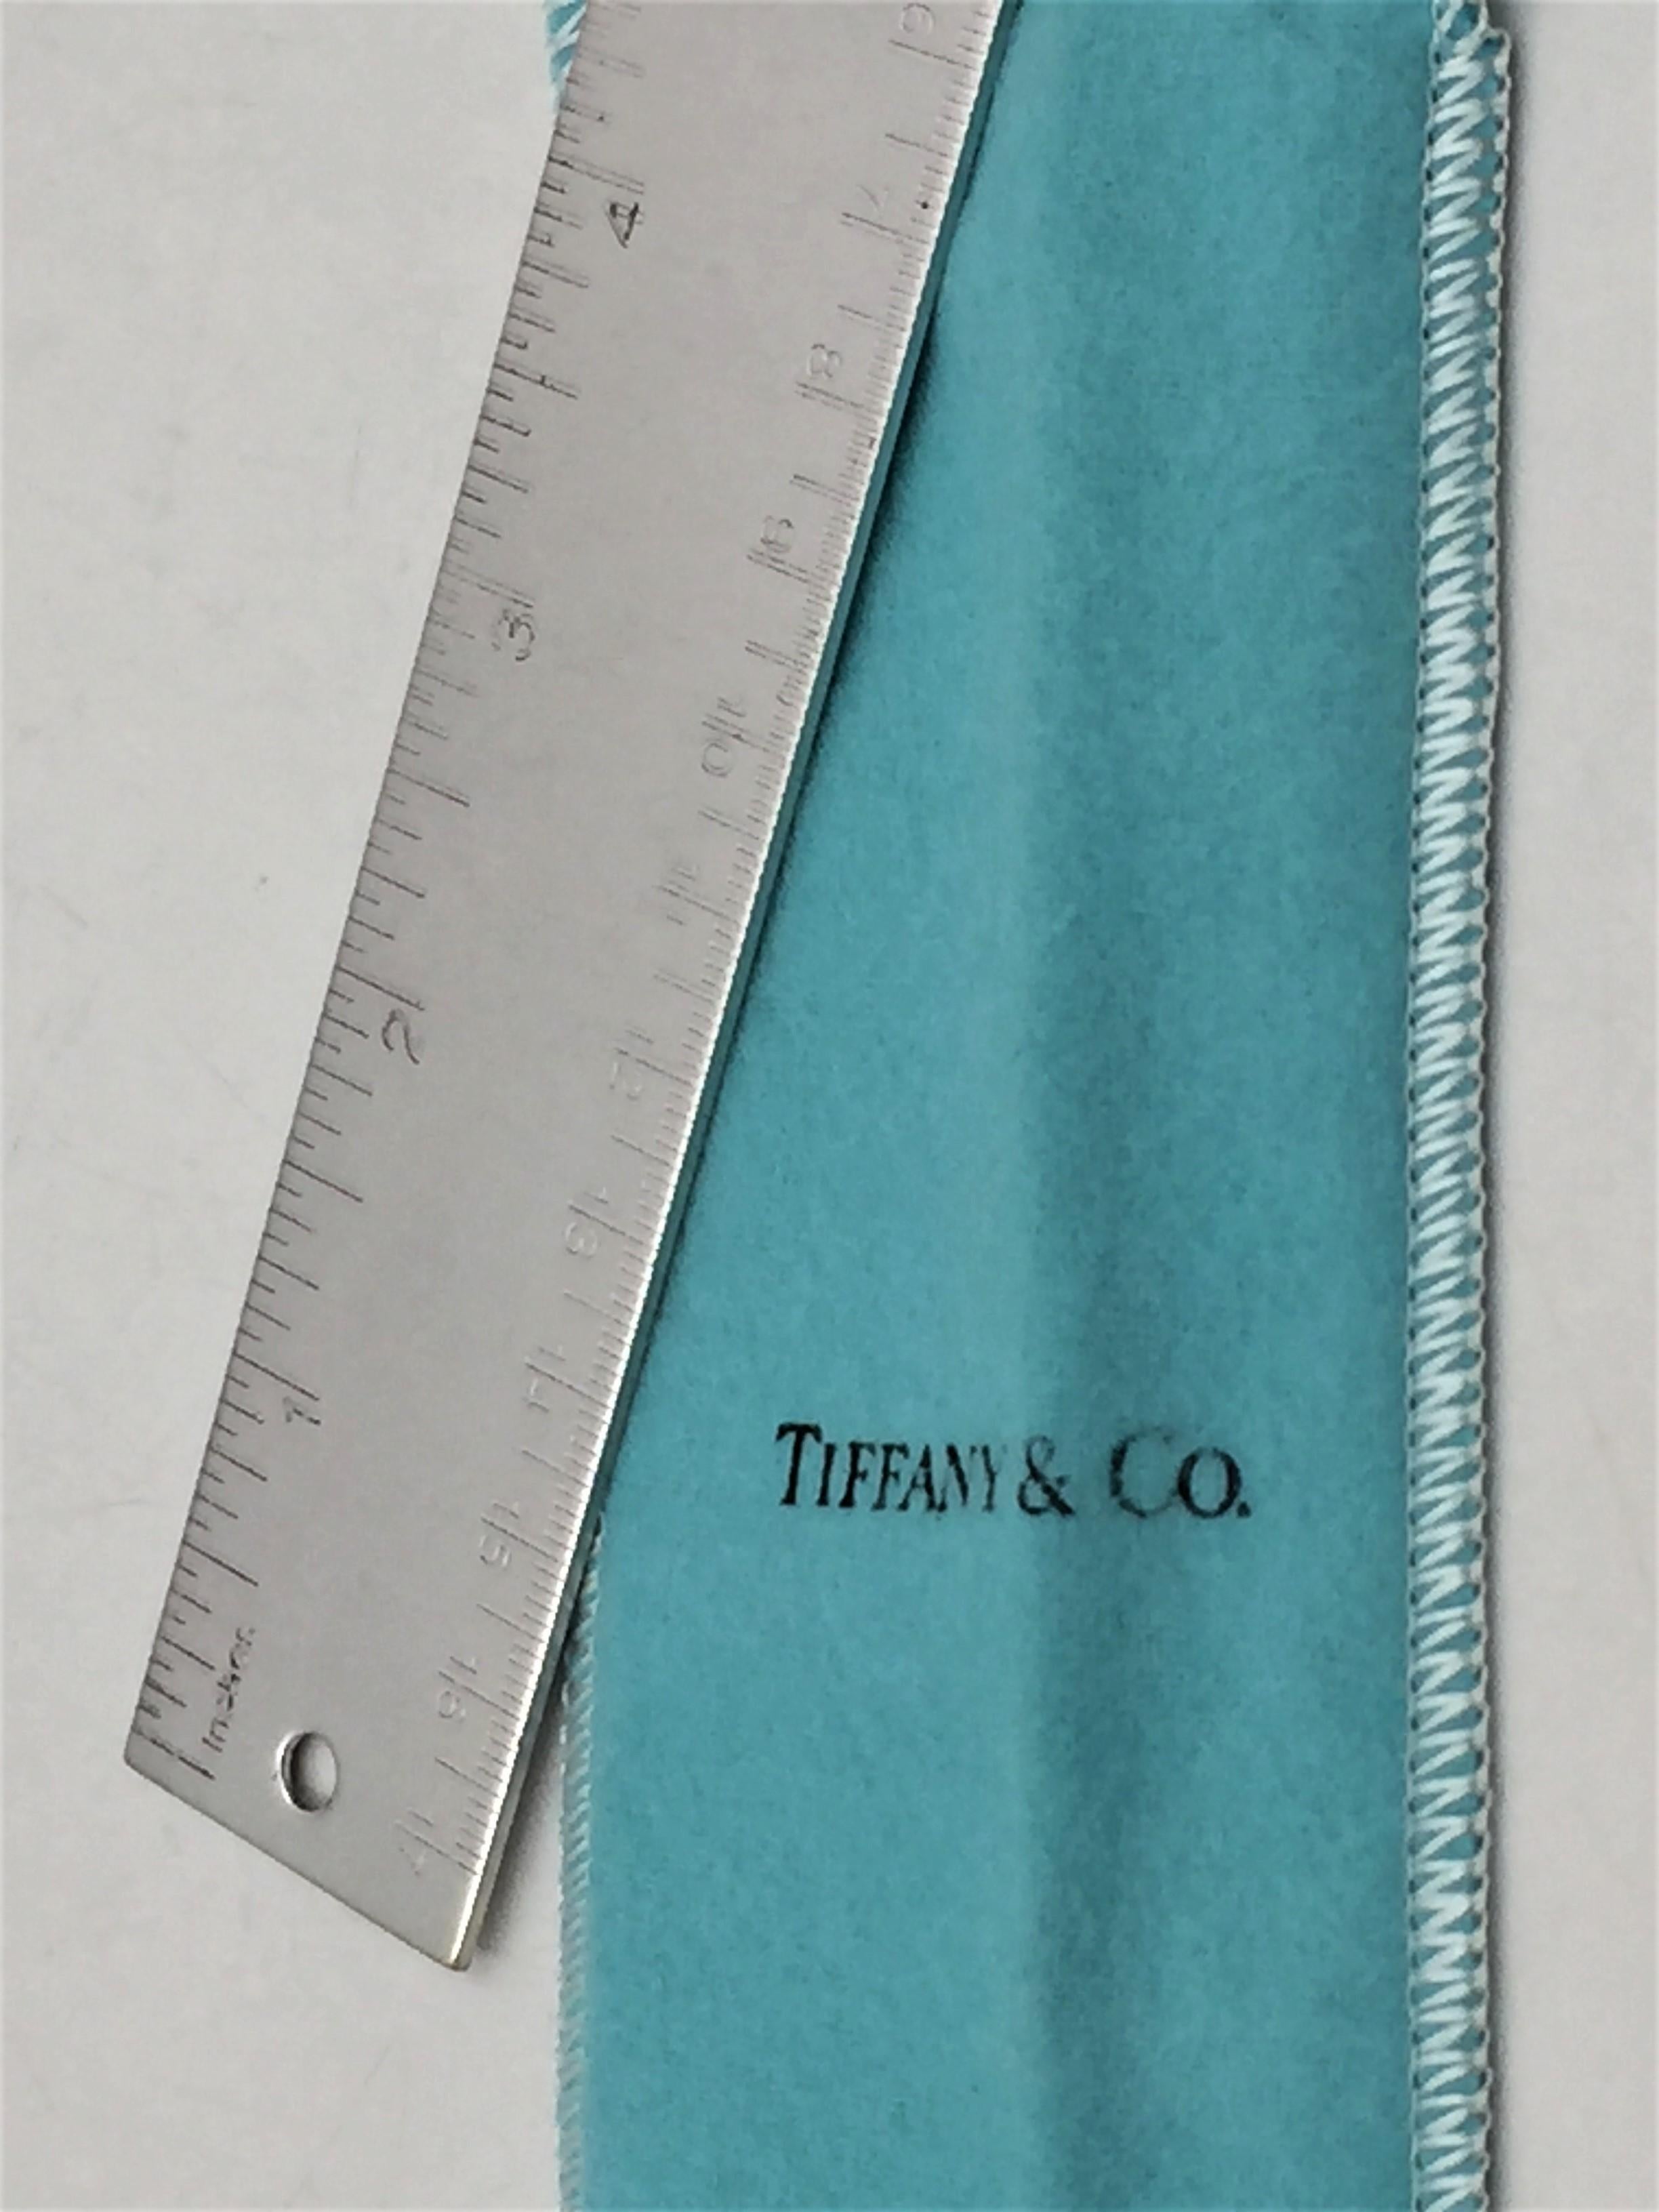 Set of 4 Tiffany & Co. Silver Rulers in Original Pouches In Excellent Condition For Sale In New York, NY